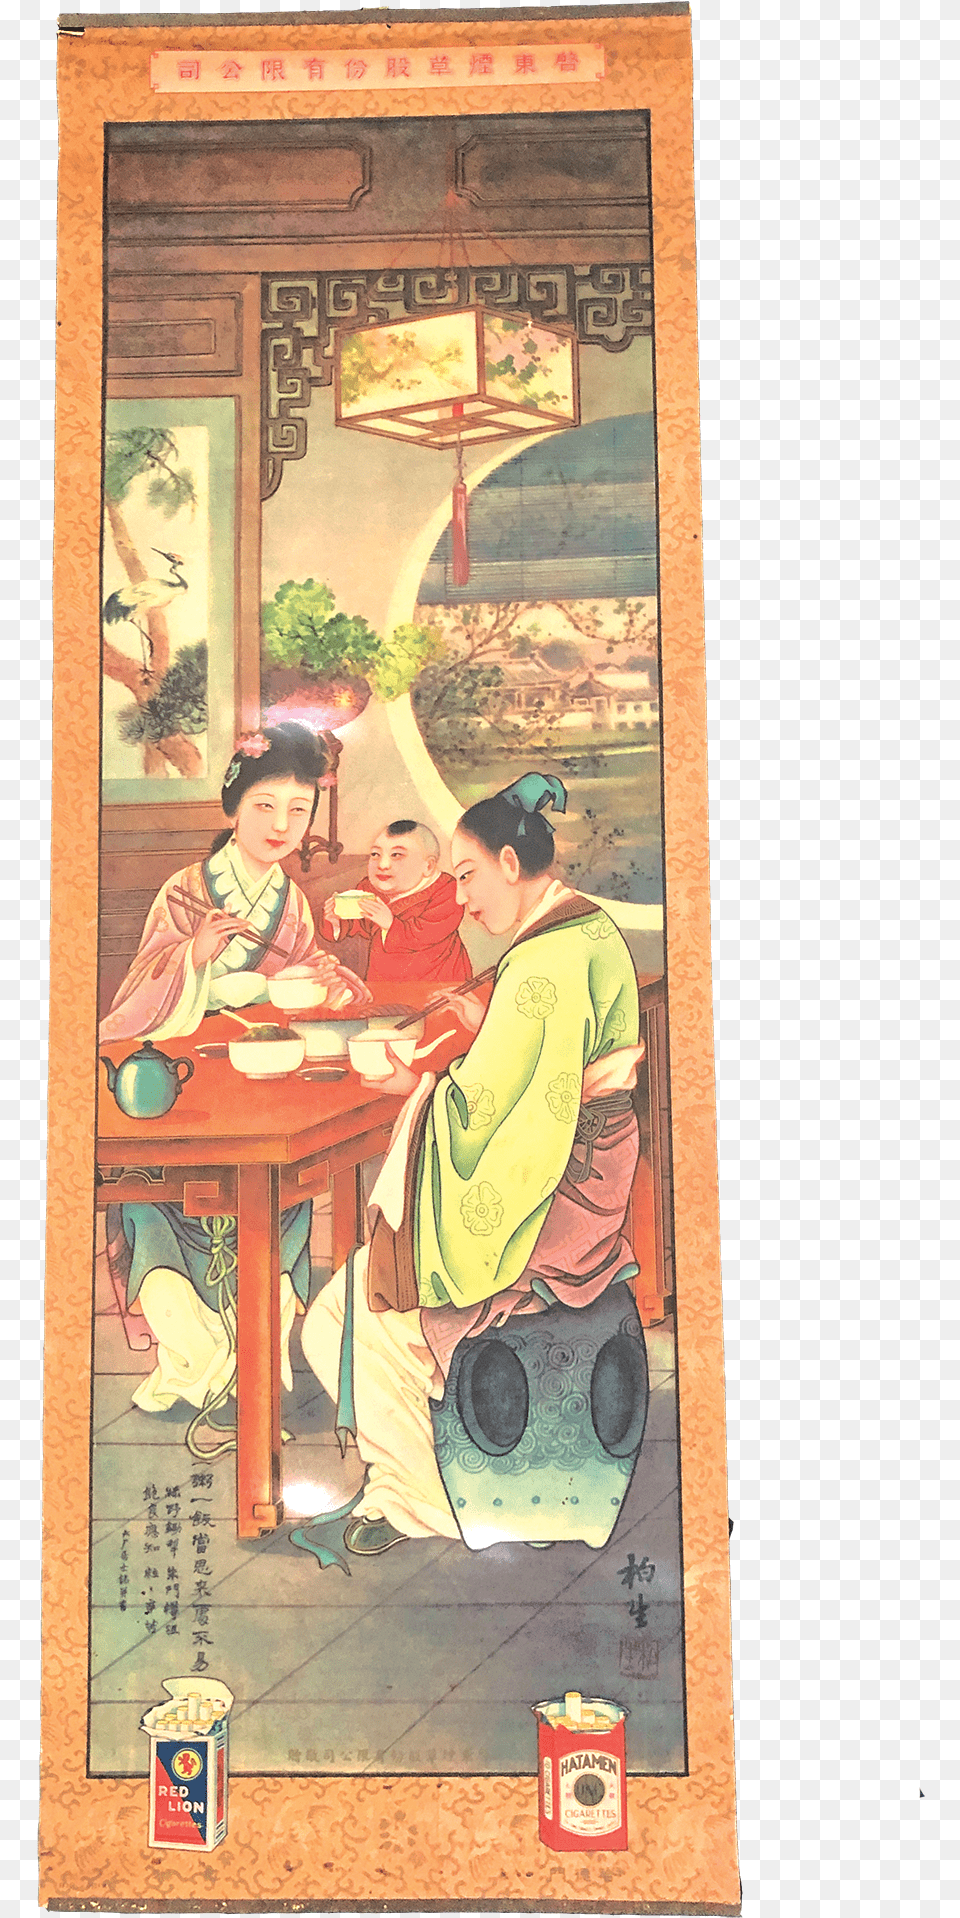 Cigarette Ad Poster Illustrating Family Life Painting, Table, Indoors, Furniture, Dining Table Png Image